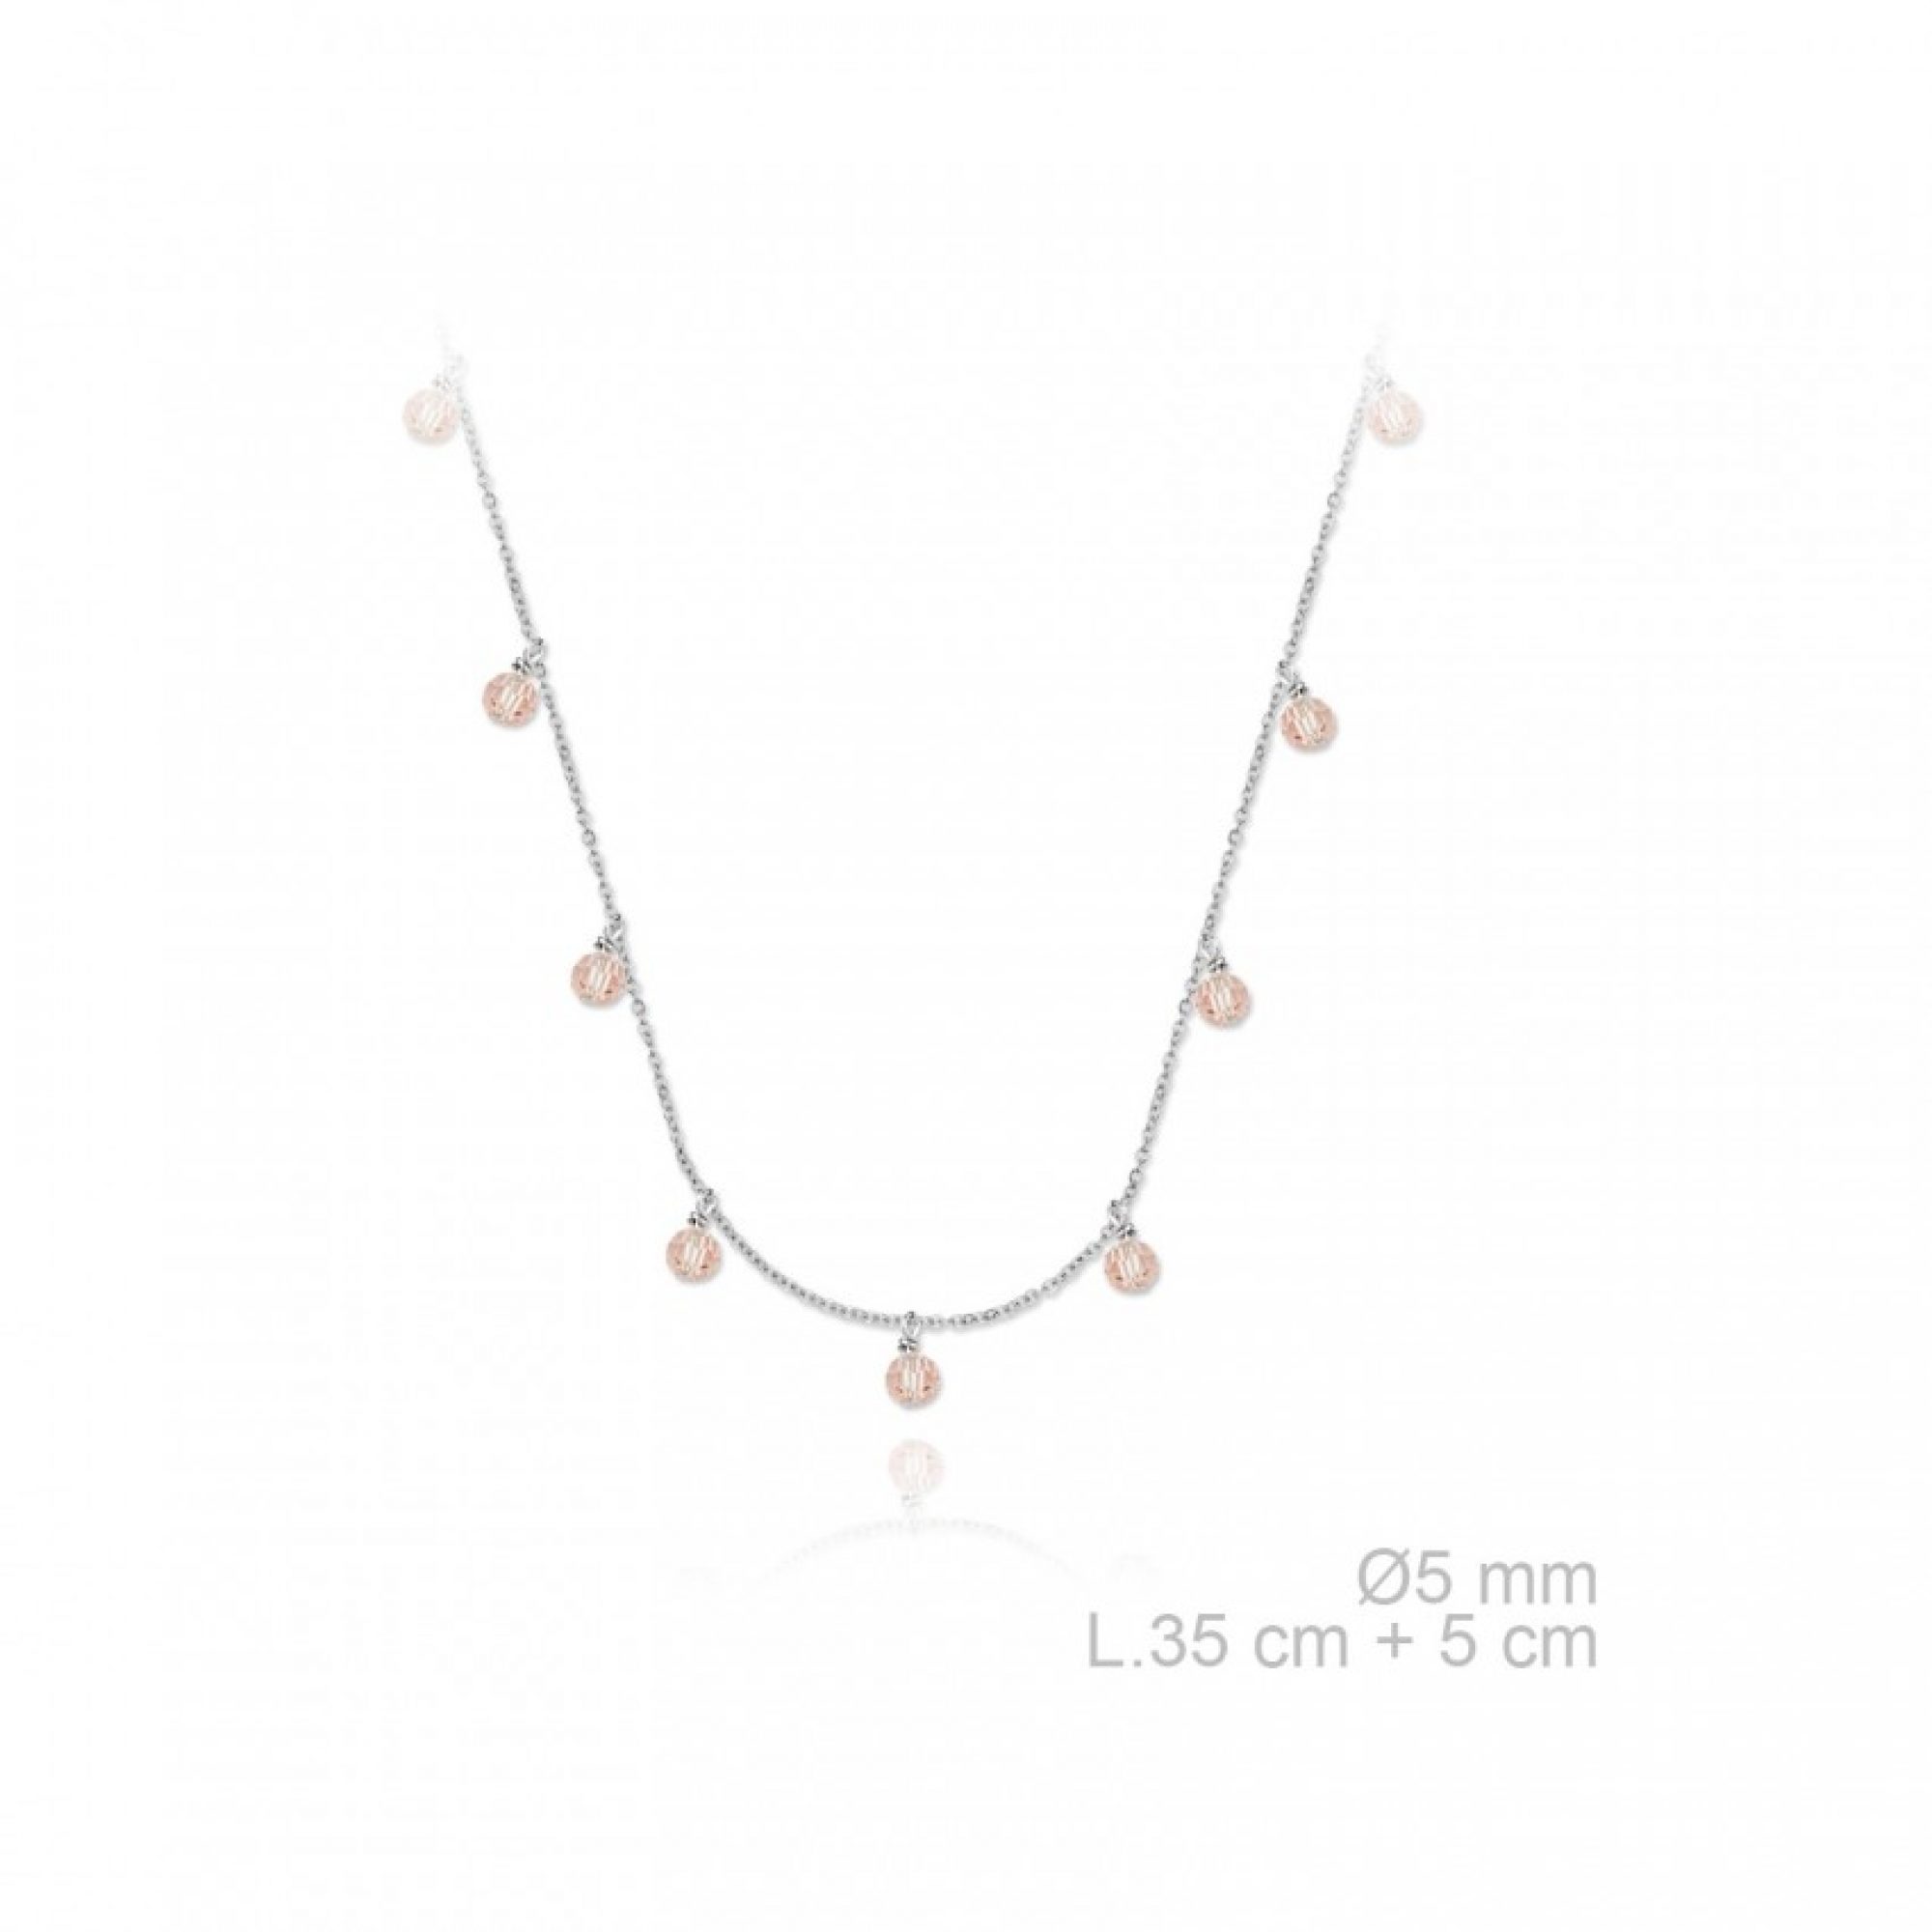 Silver dangle necklace with pink stones